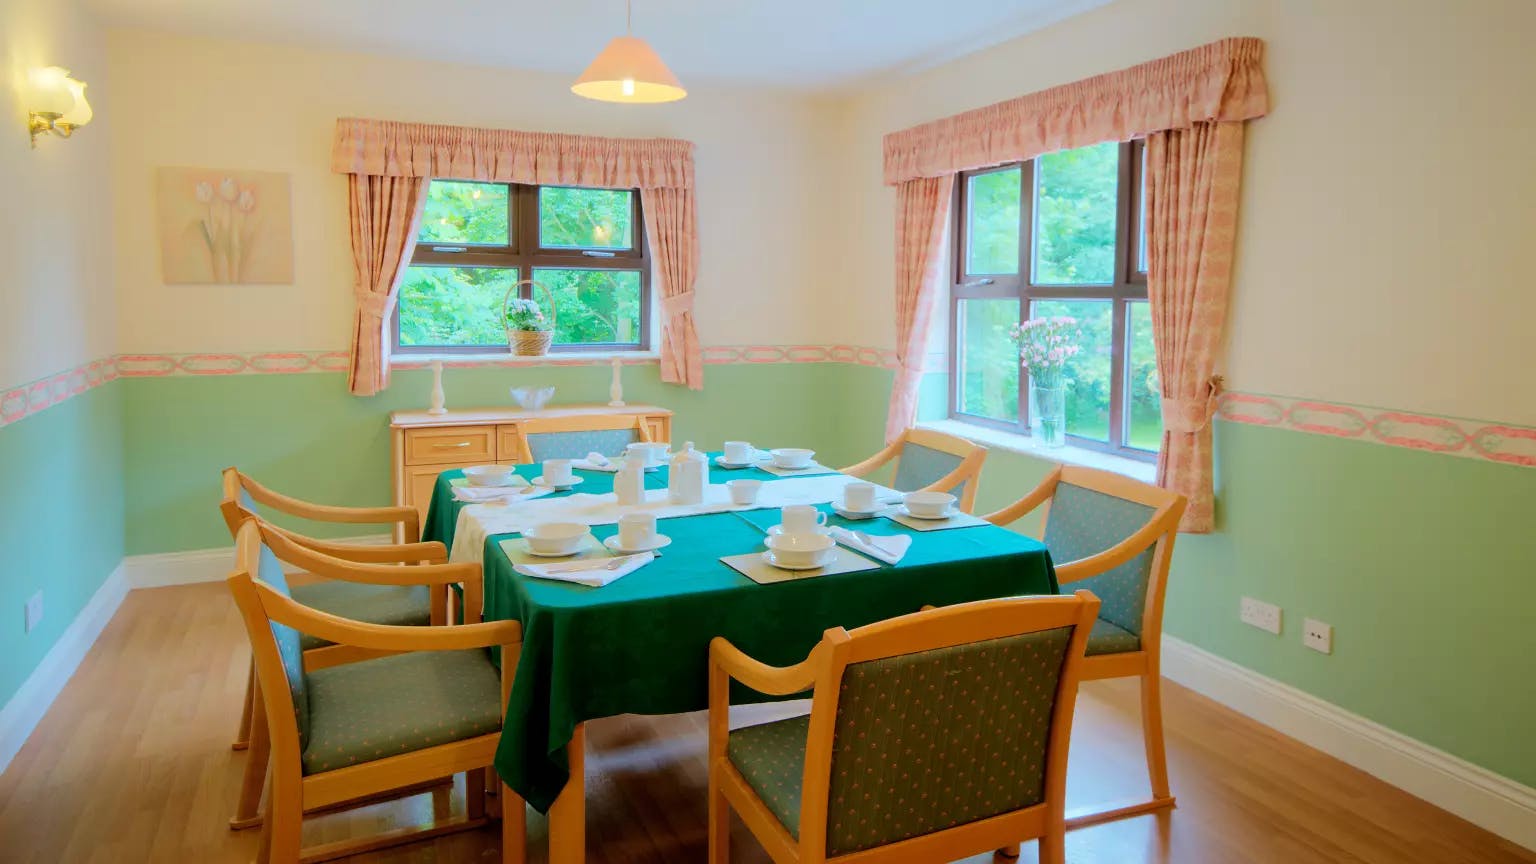 Dining area of Beane River View care home in Hertford, Hertfordshire